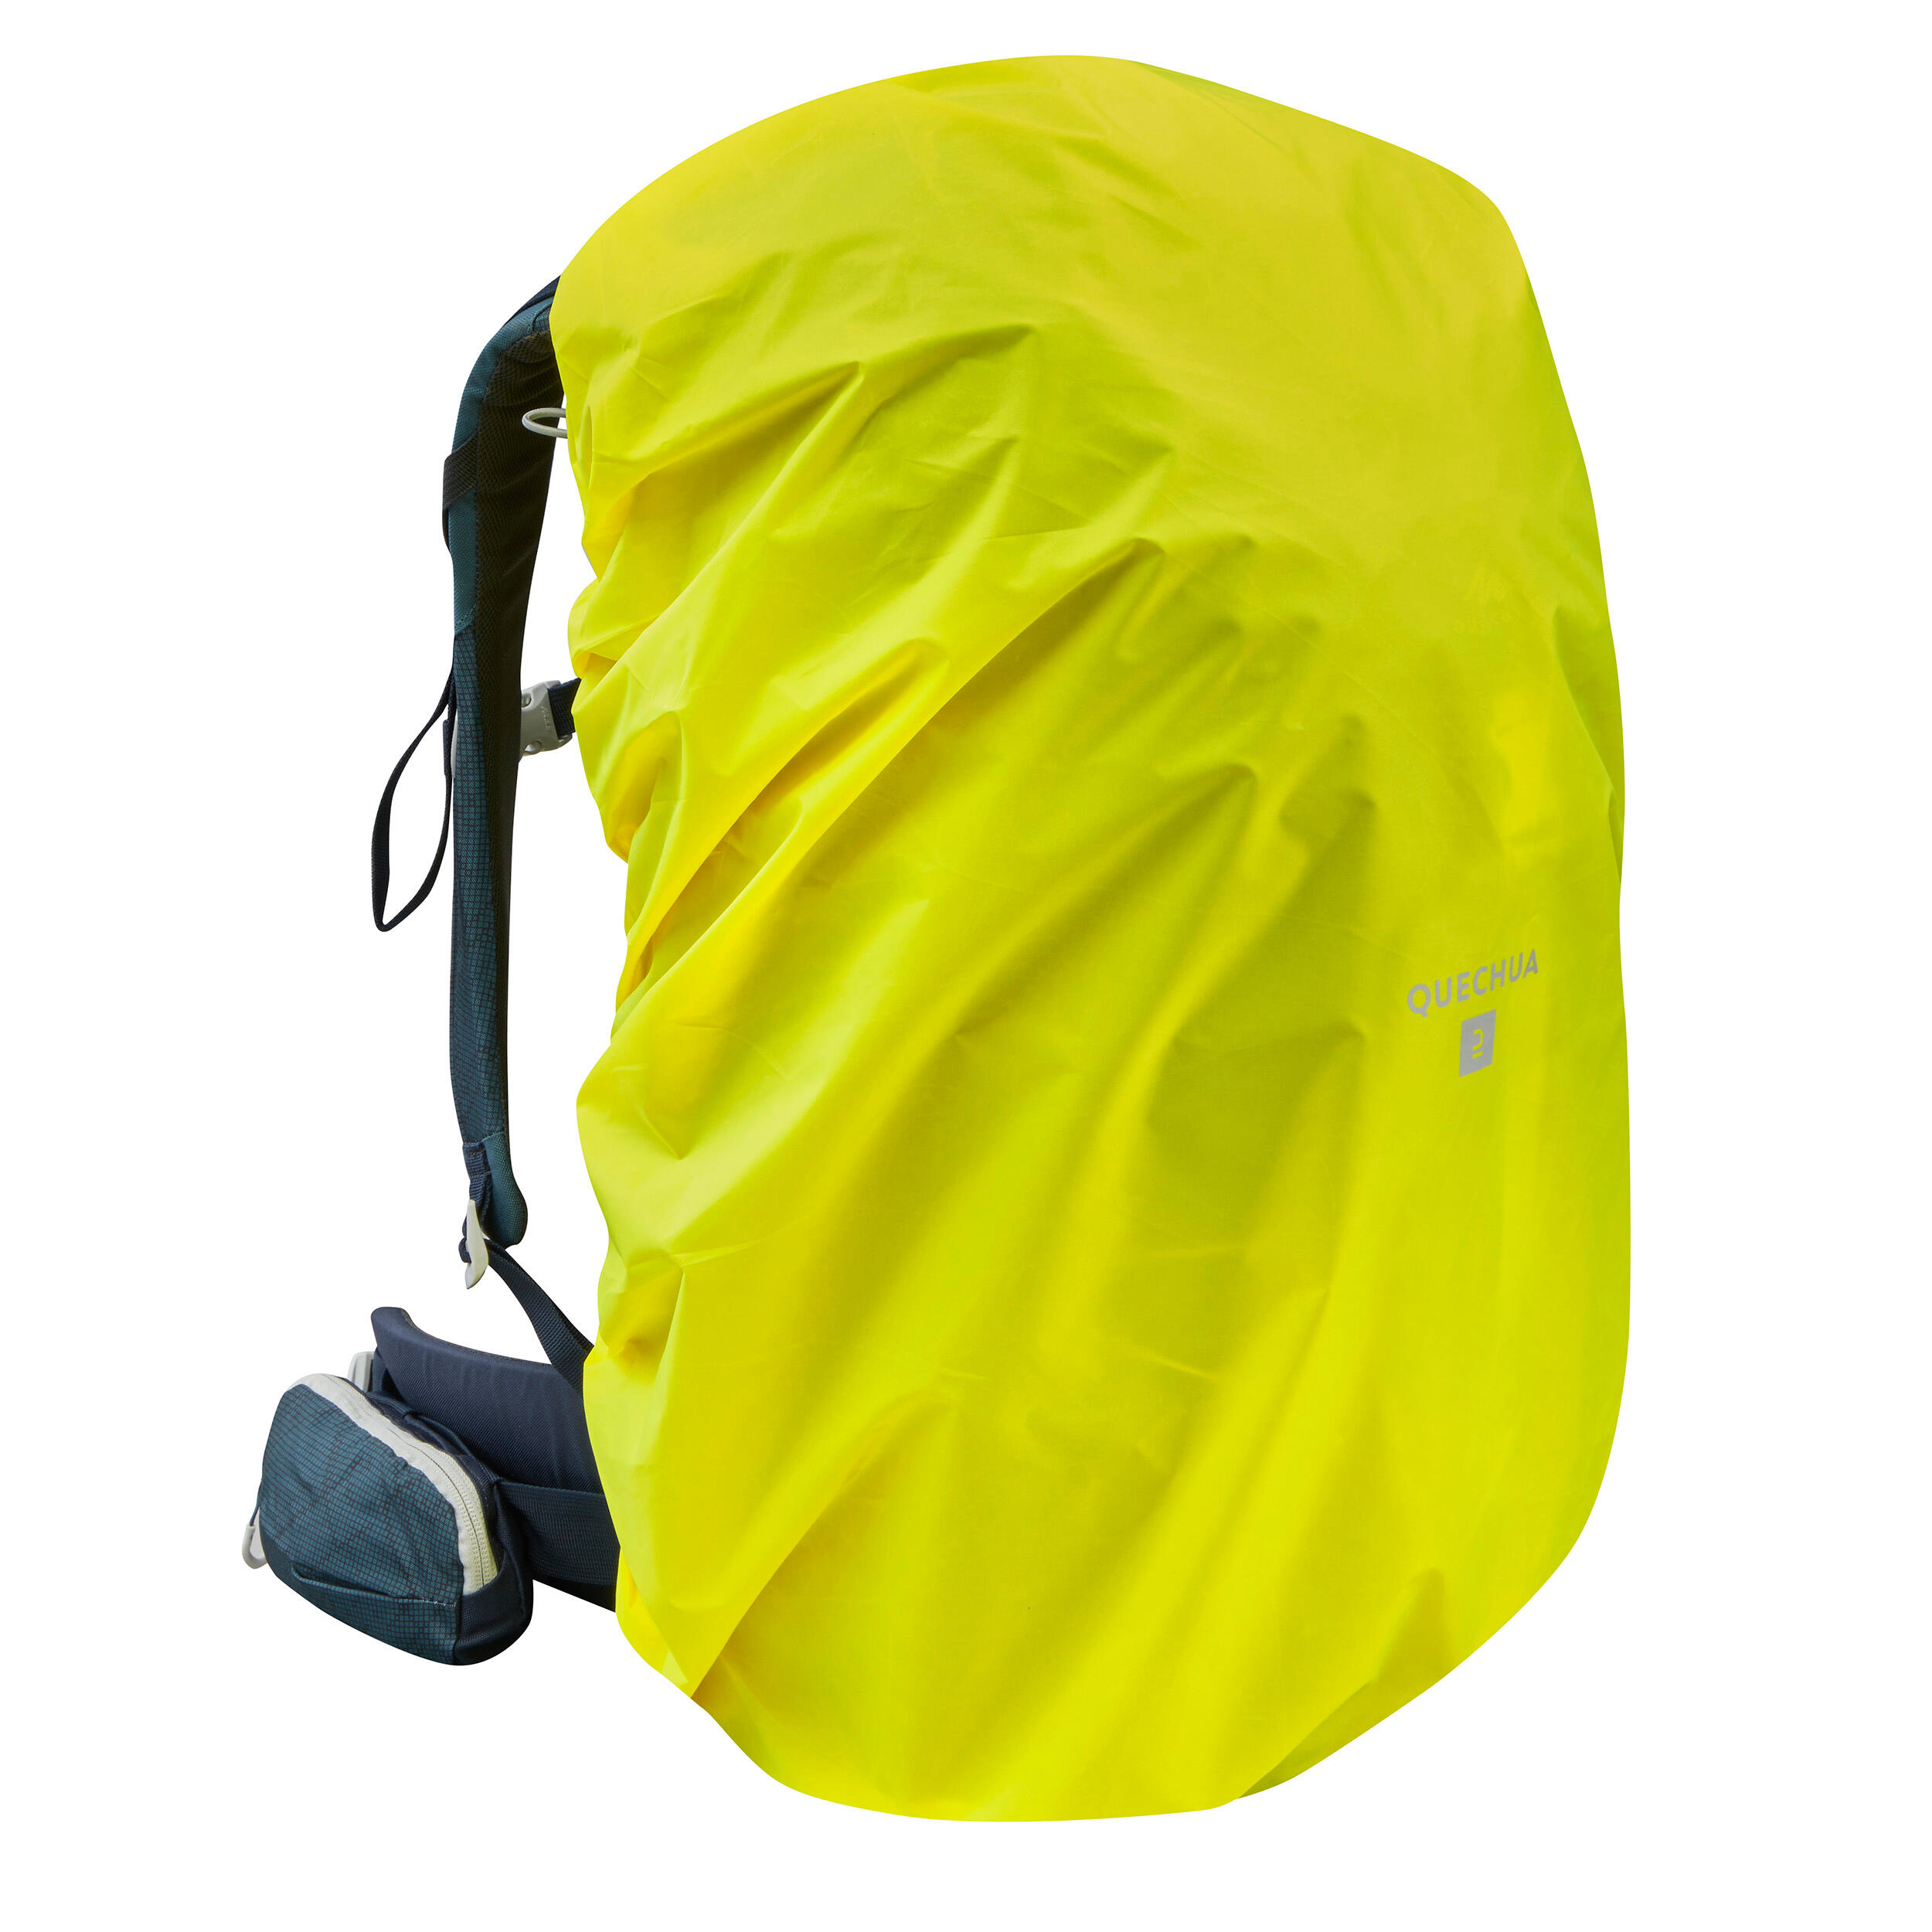 20-40 L Rain Cover for Backpack - Yellow - FORCLAZ